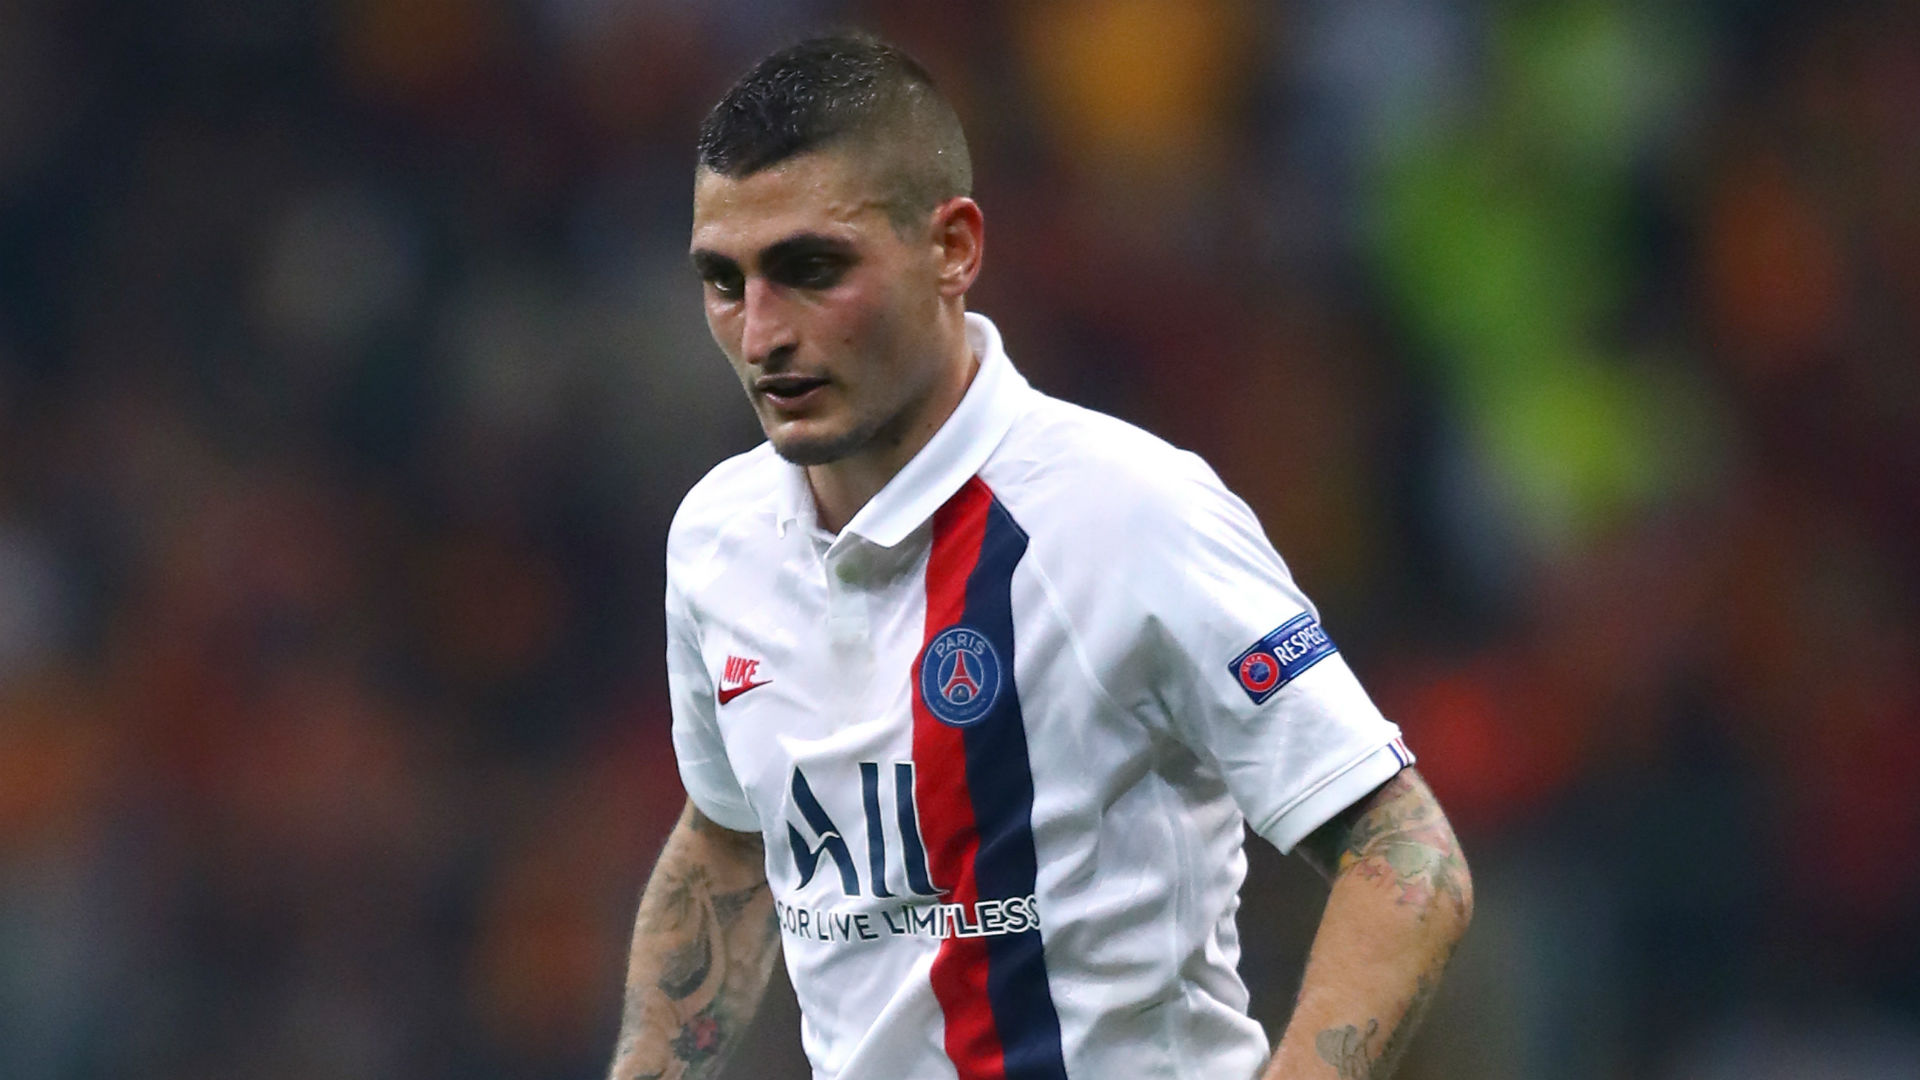 Marco Verratti suffered an injury that has Paris Saint-Germain's Thomas Tuchel concerned ahead of the Champions League clash with Atalanta.